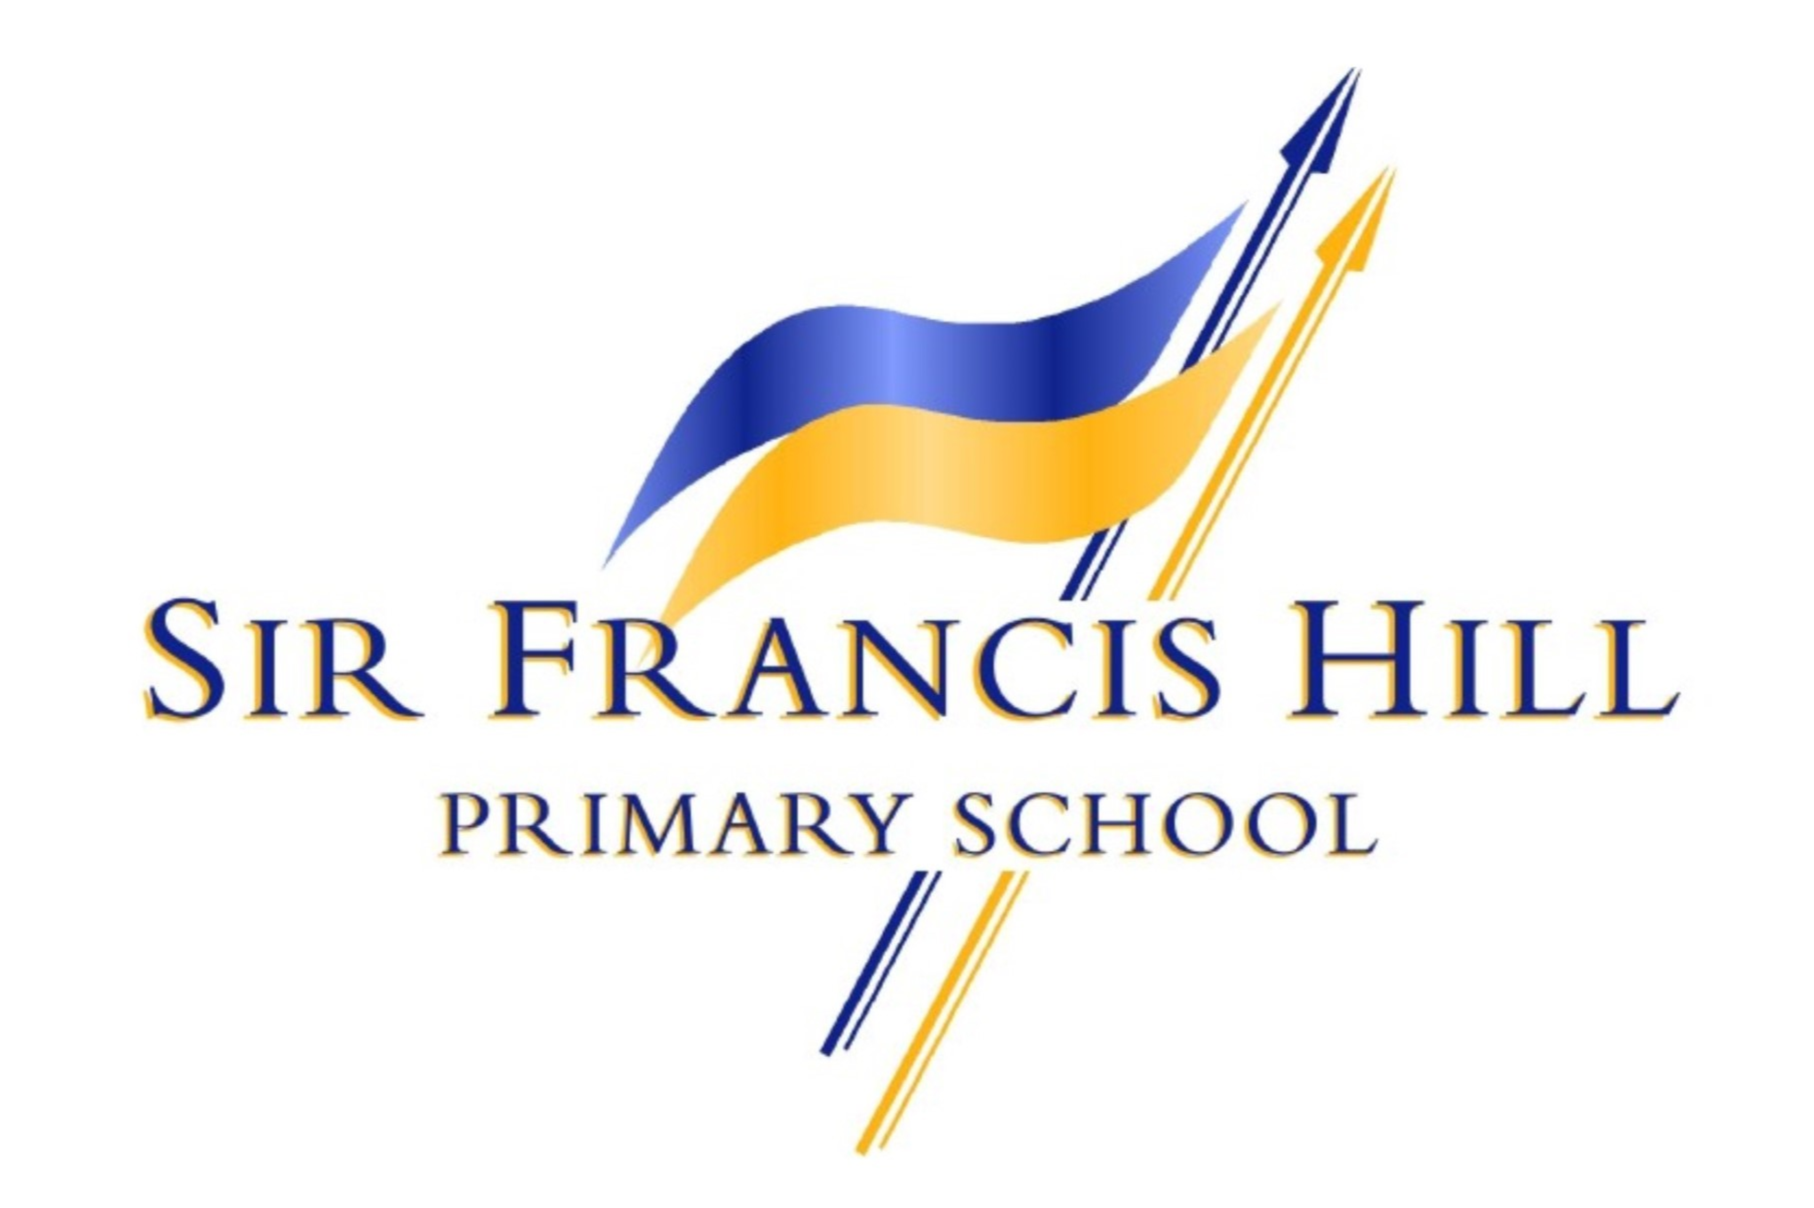 The logo of Sir Francis Hill Primary School.